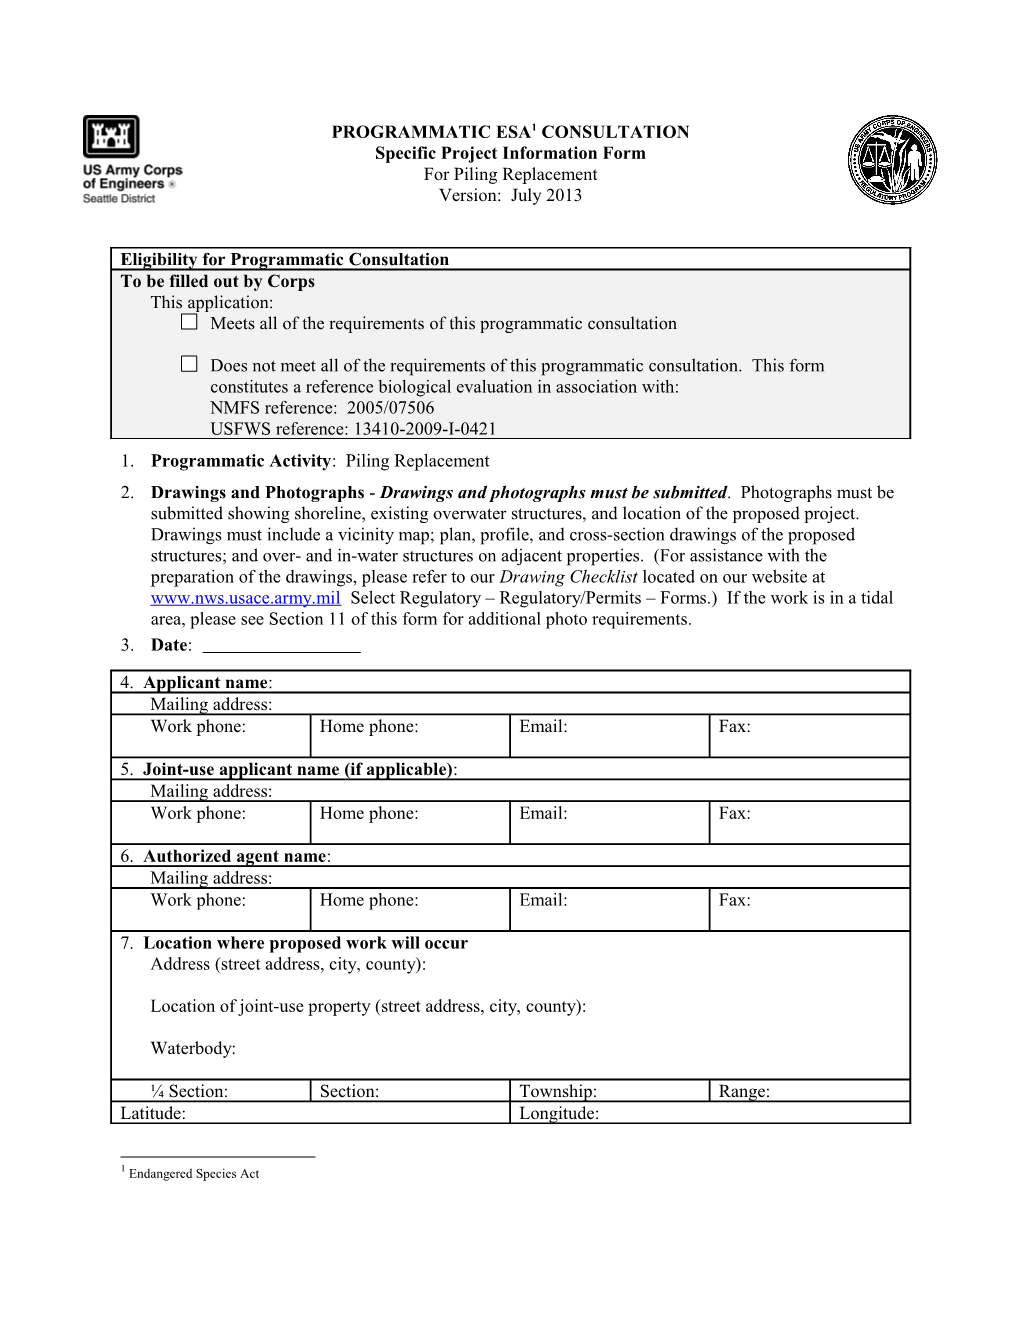 Specific Project Information Form (Spif)